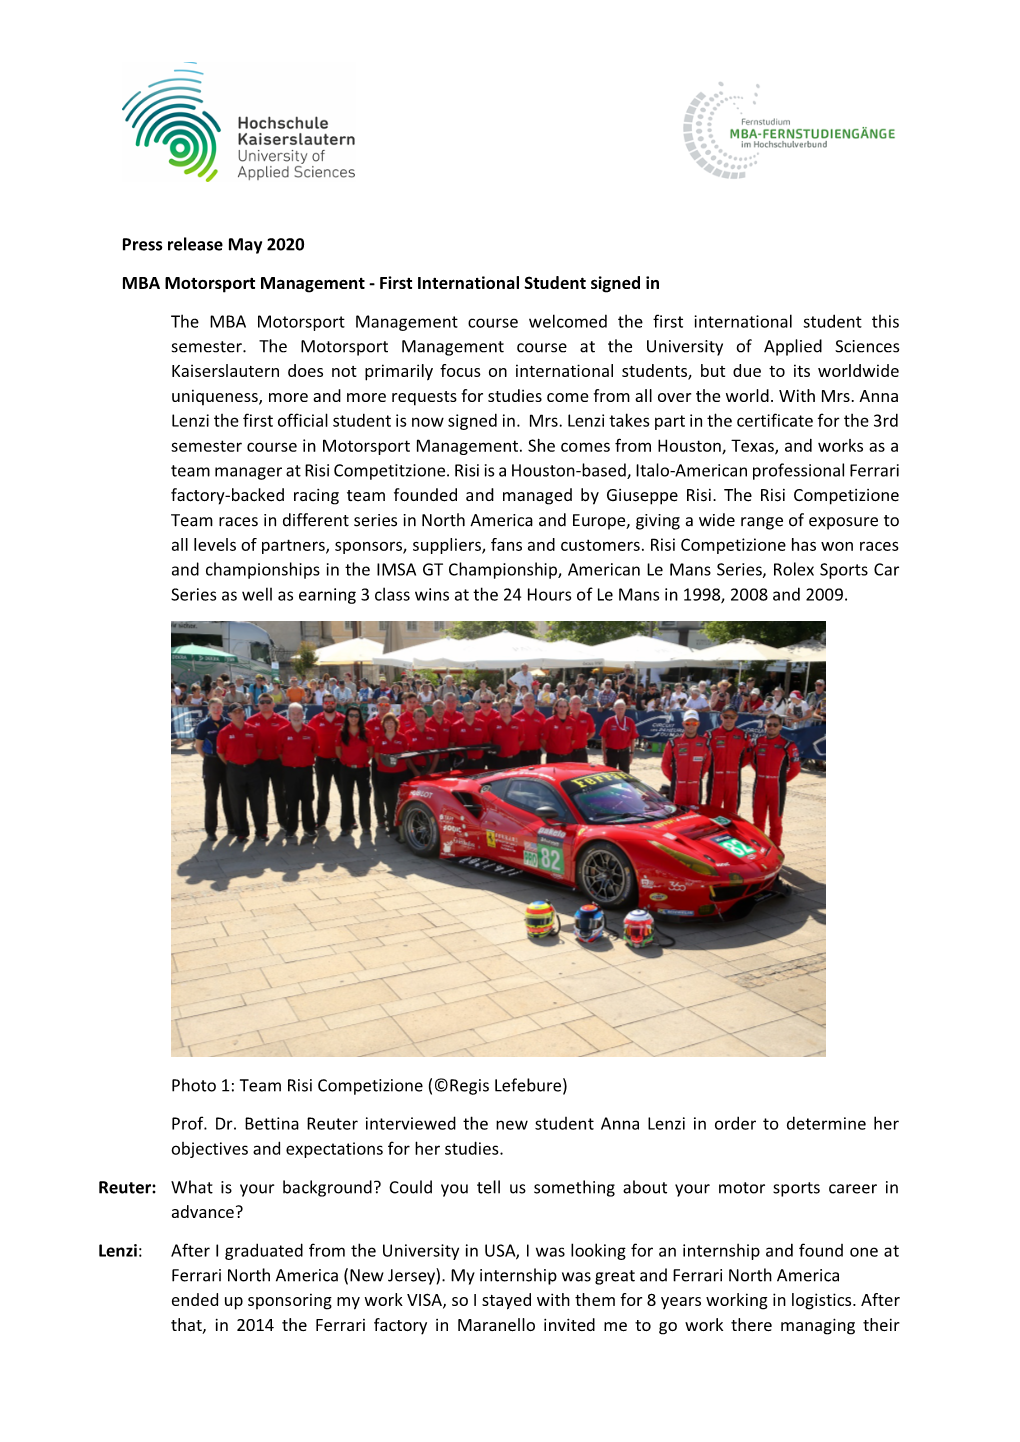 Press Release May 2020 MBA Motorsport Management